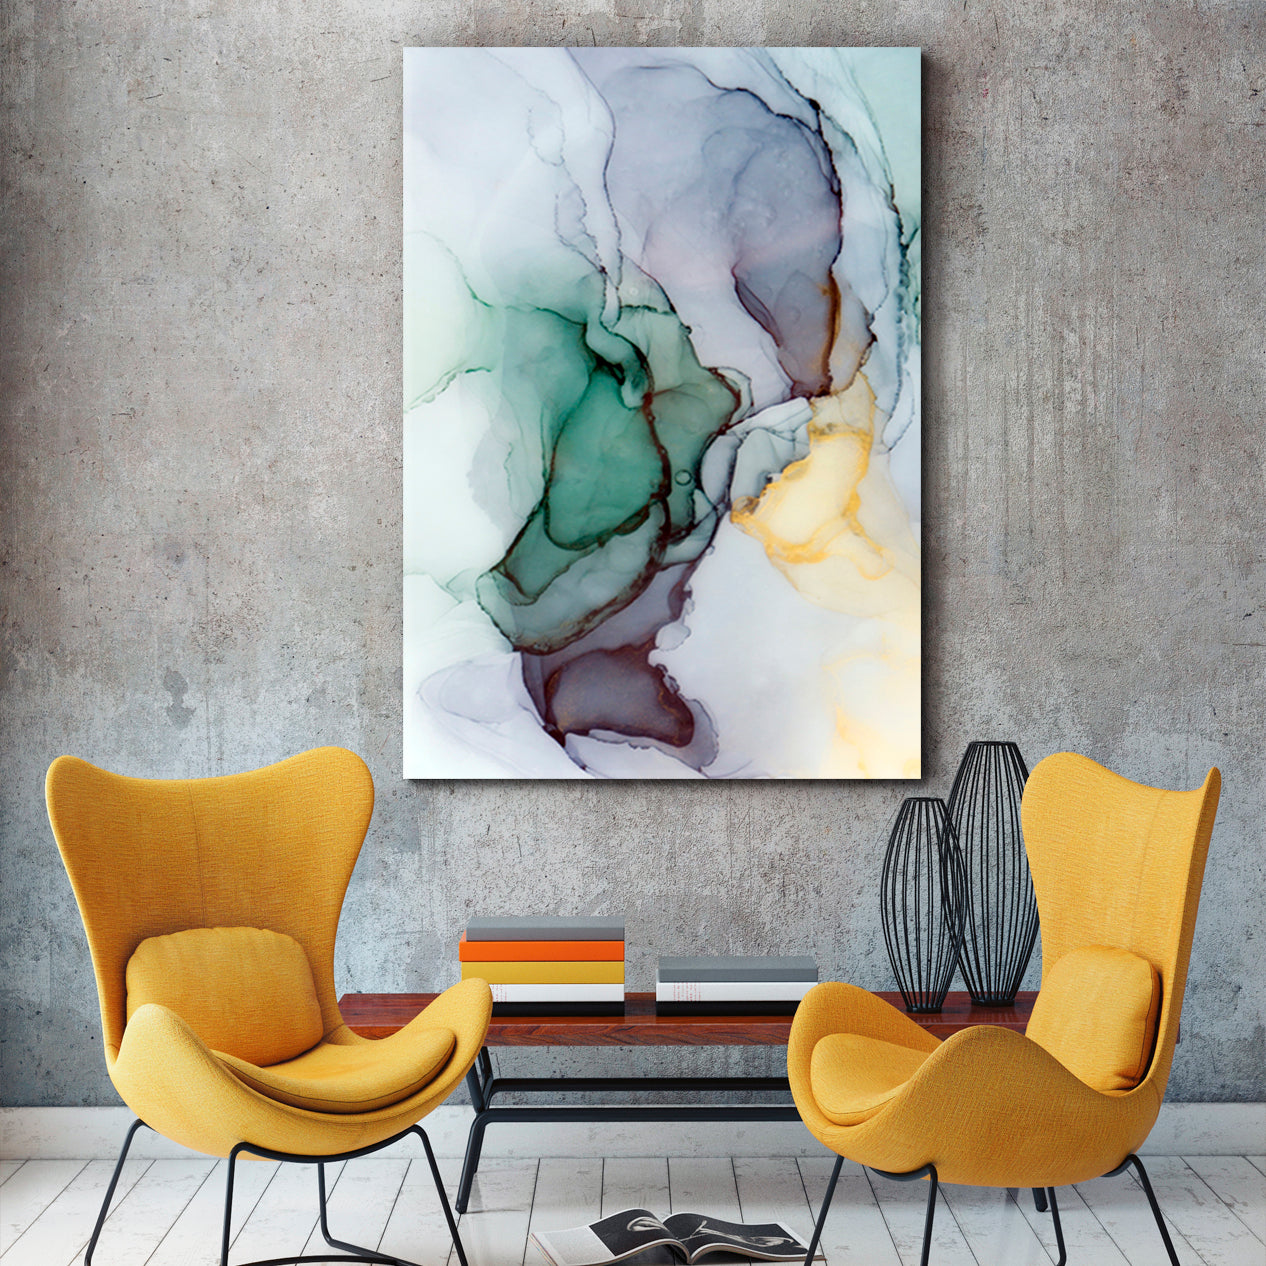 Abstract Veins Alcohol Ink Paint Translucent Free-flowing Fluid Art, Oriental Marbling Canvas Print Artesty   